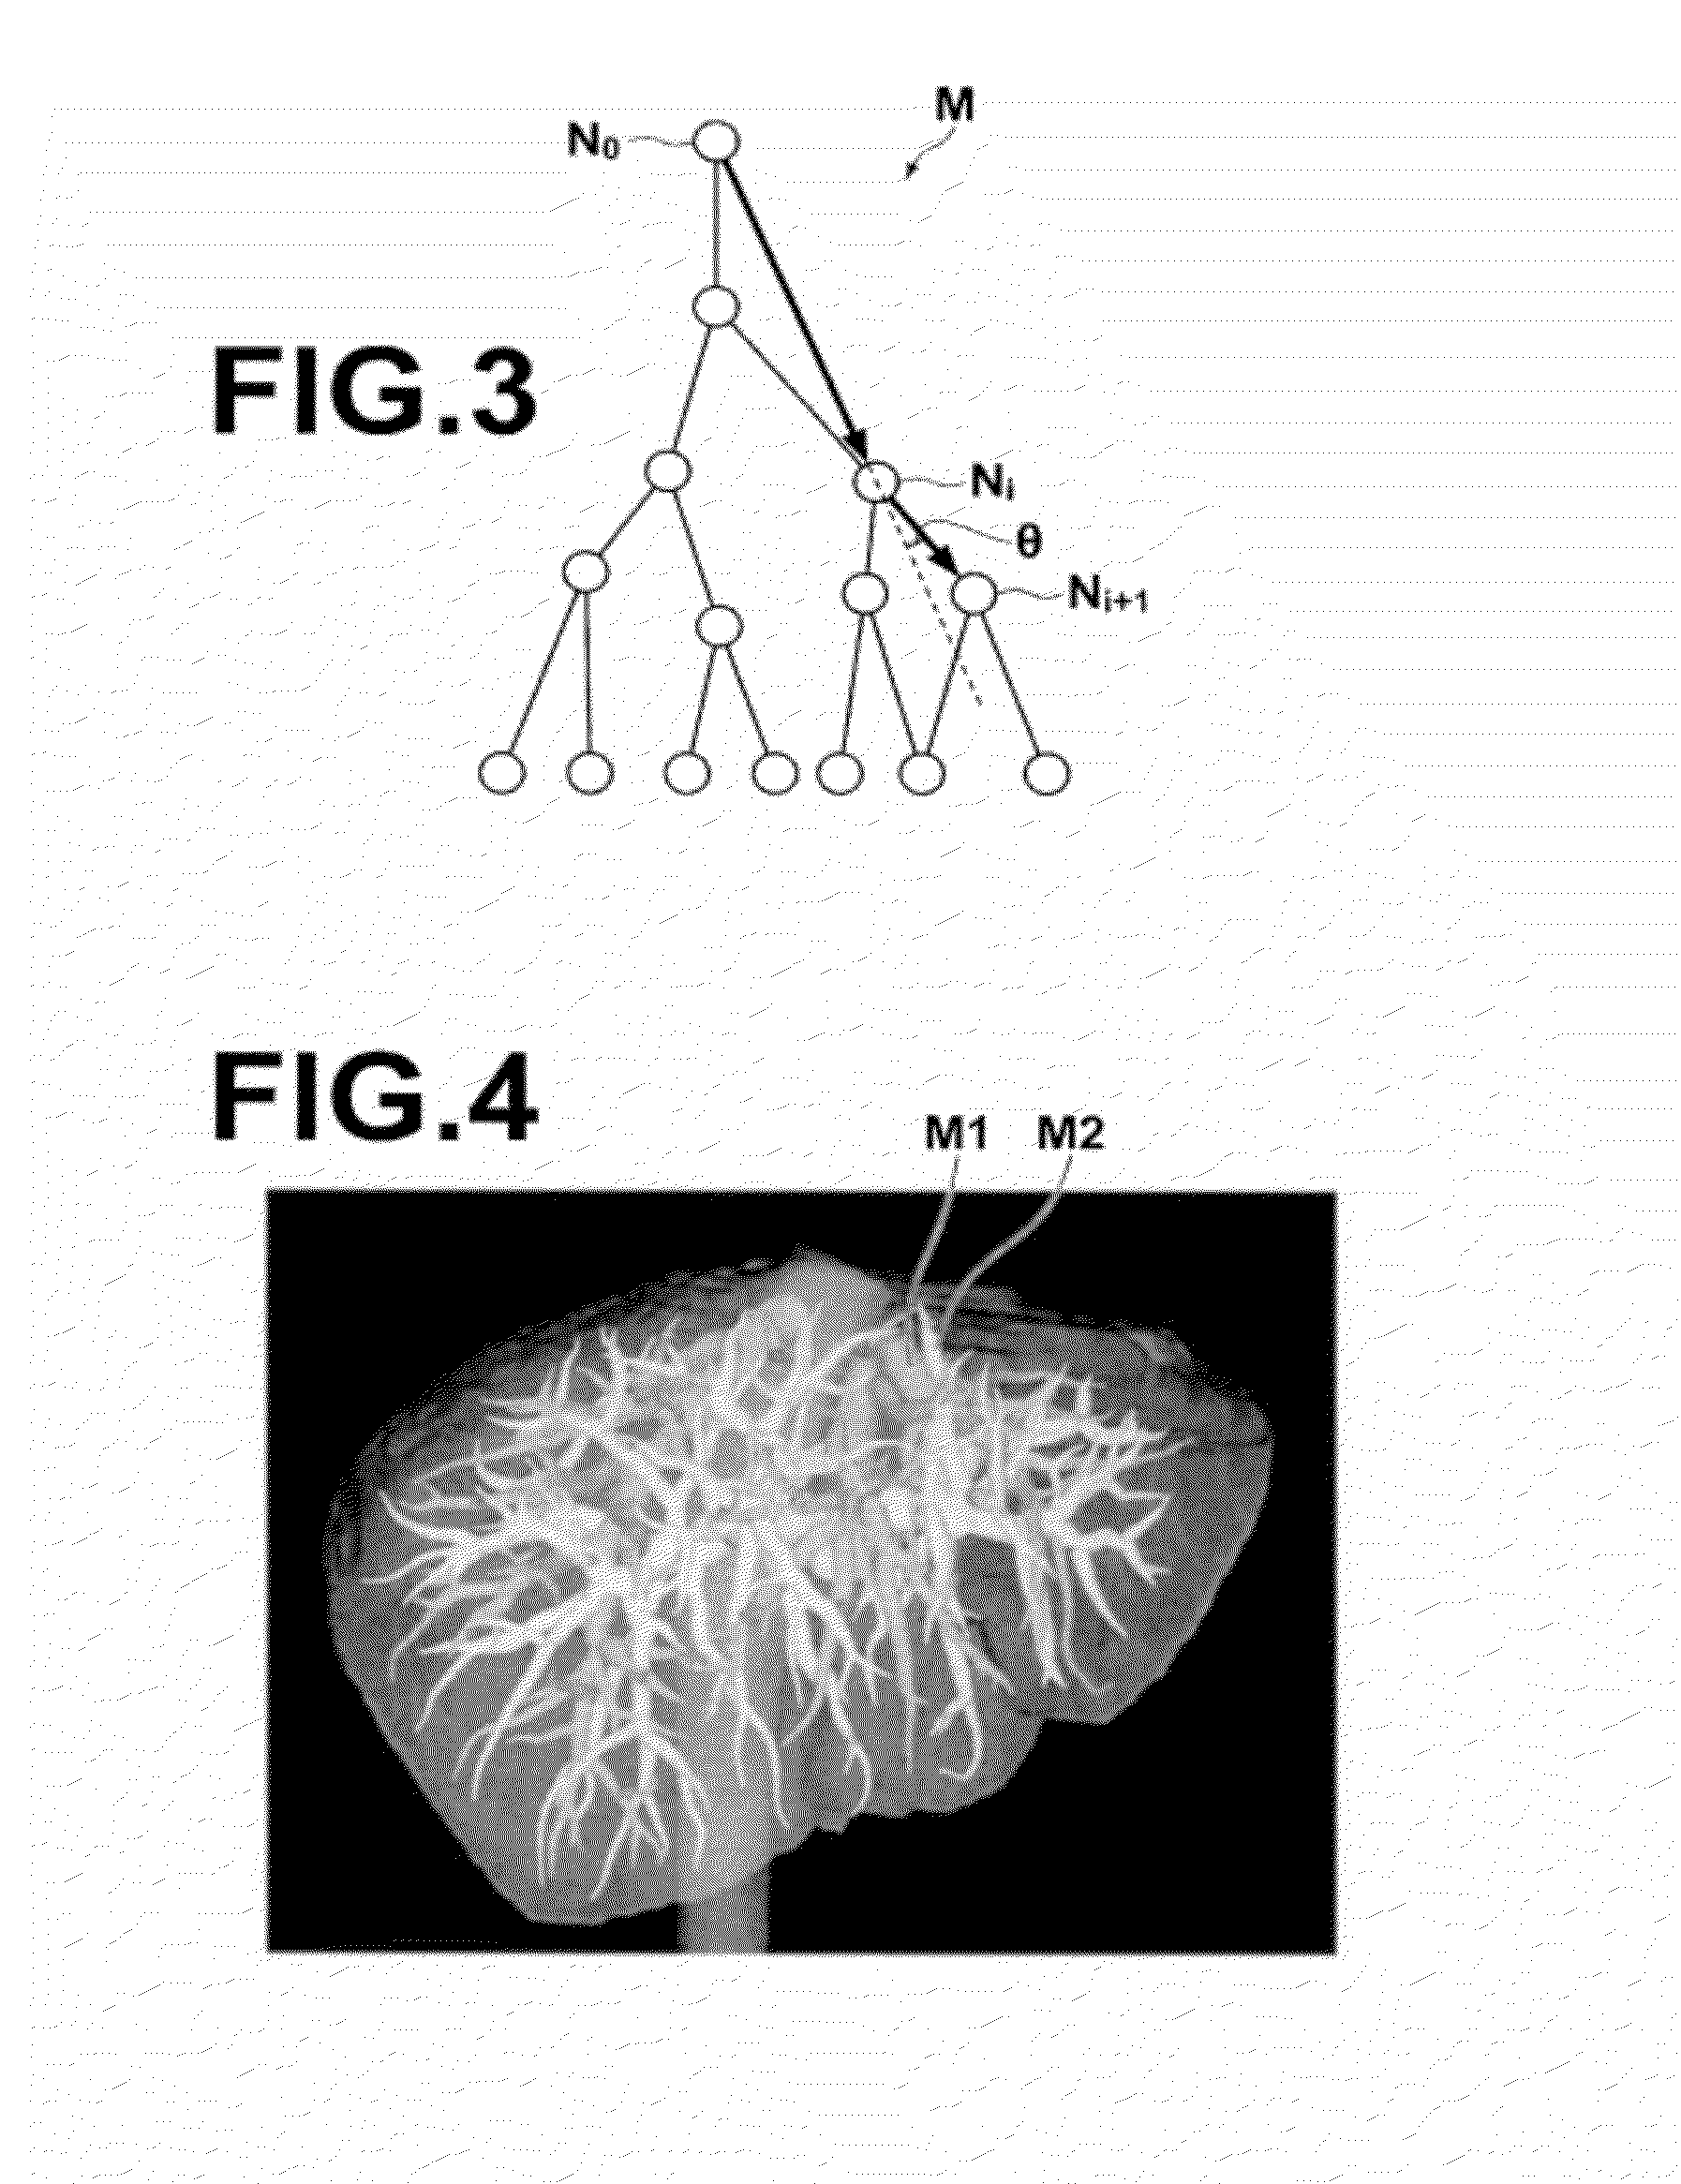 Tree structure creation apparatus, method and program